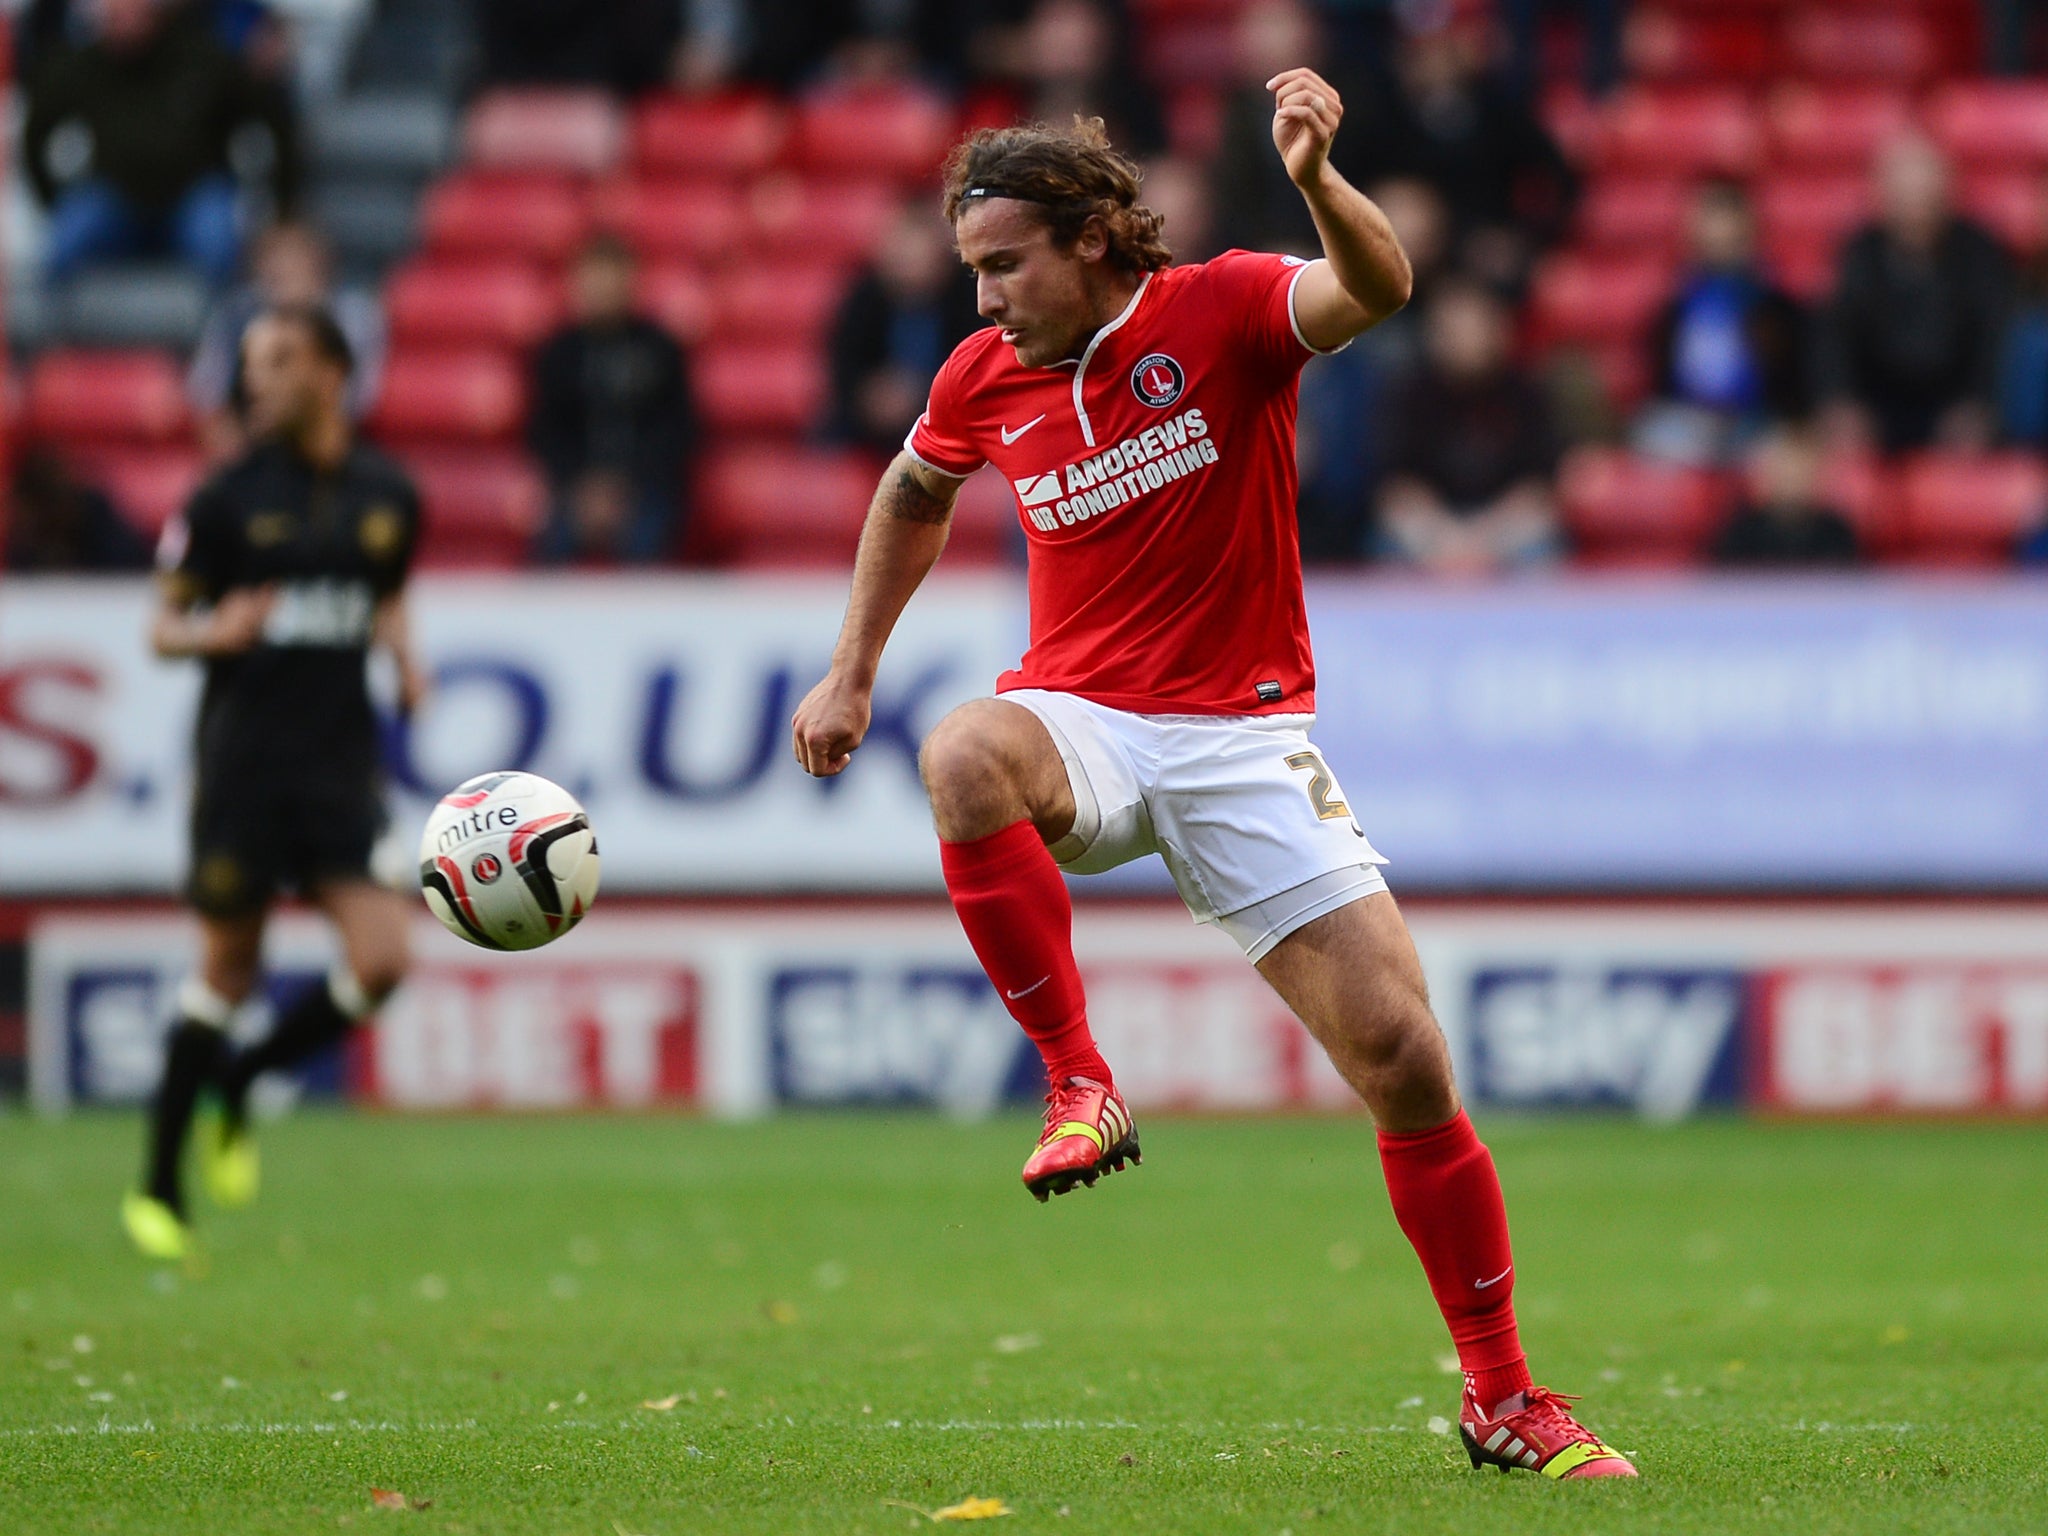 Lawrie Wilson, pictured earlier in the season against Wigan, scored twice for Charlton in their 3-2 win over Brighton